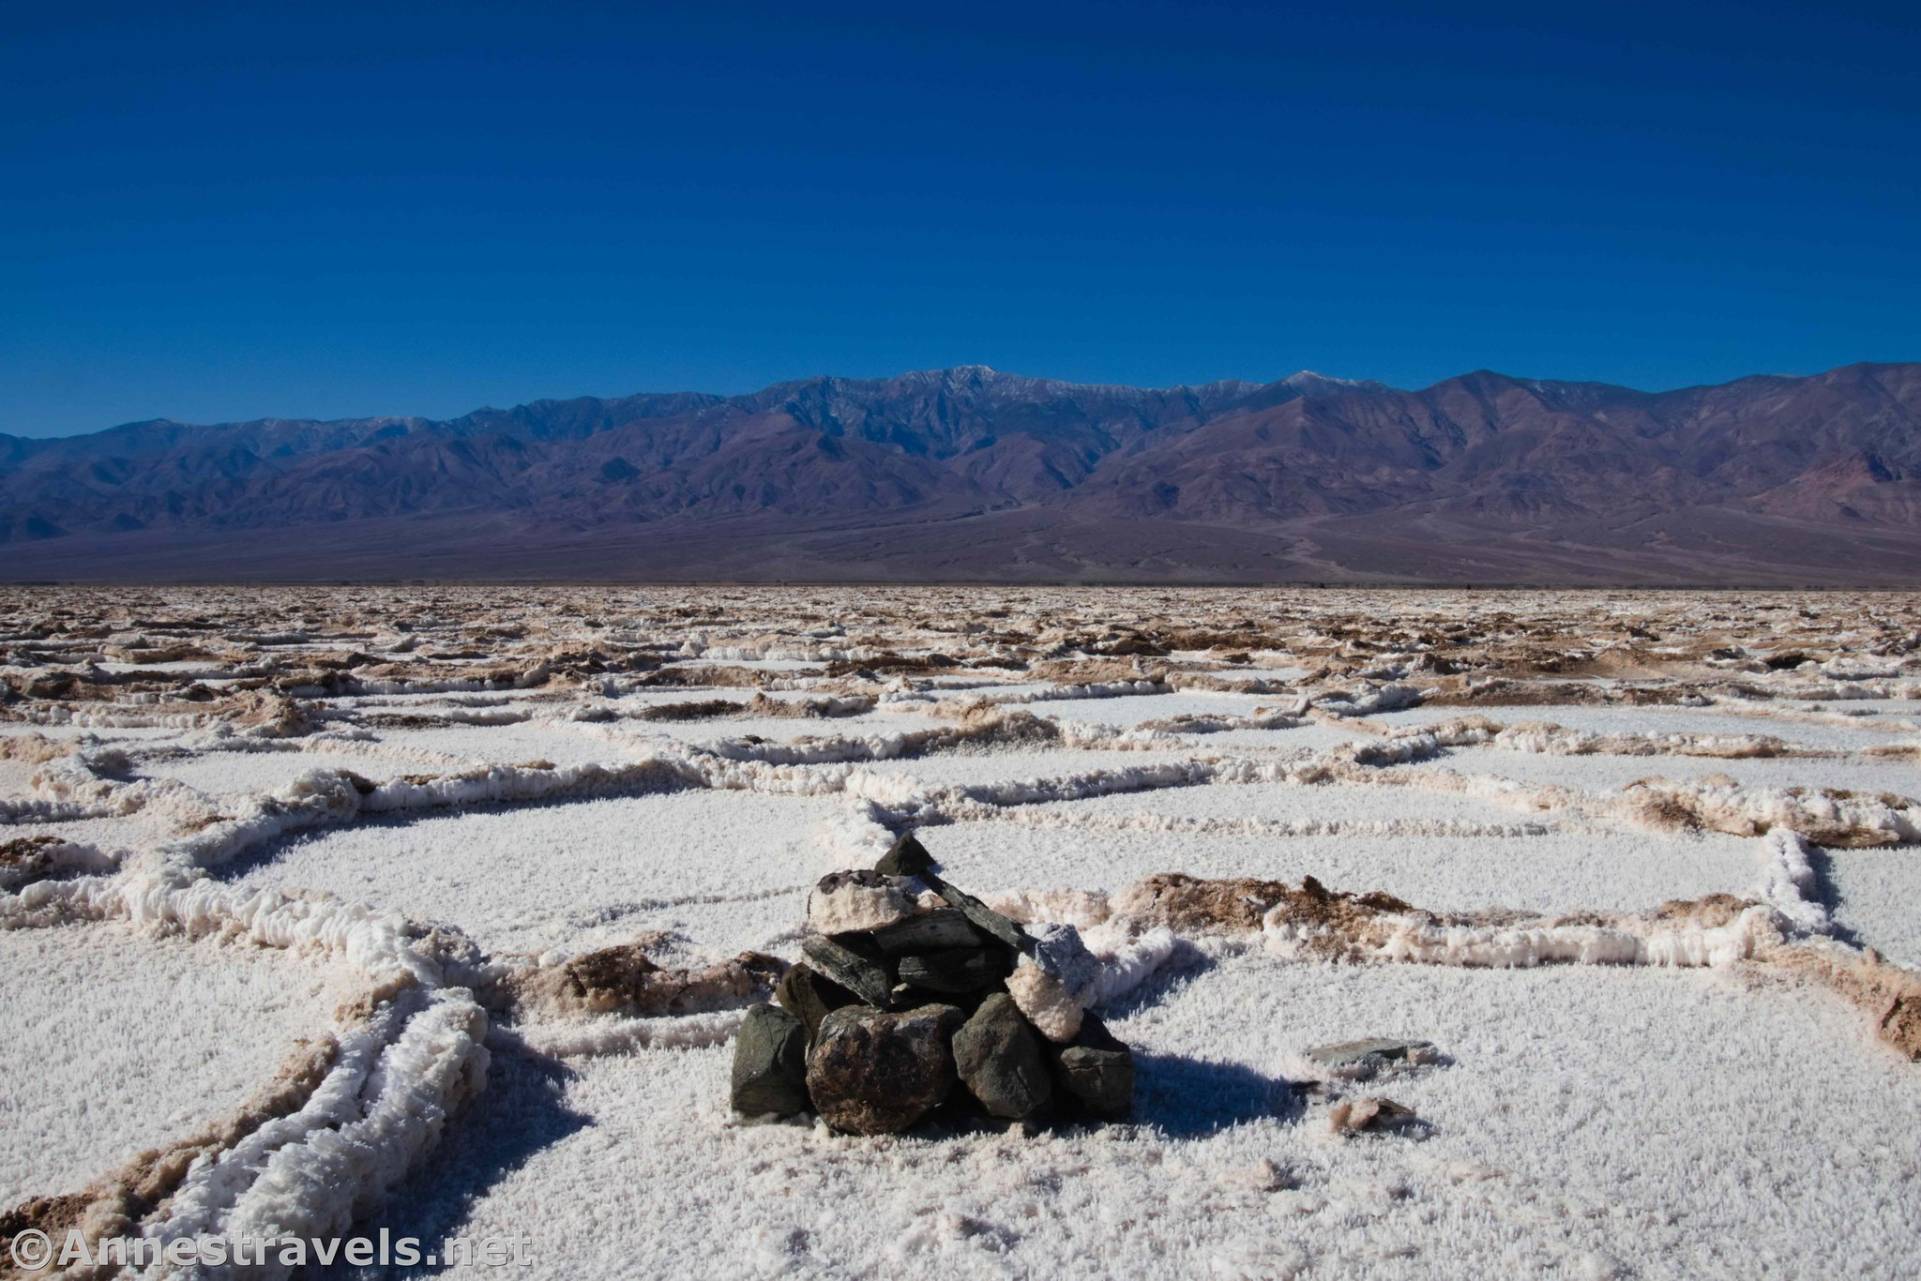 Cairn marking the Lowest Point in North America, Death Valley National Park, California